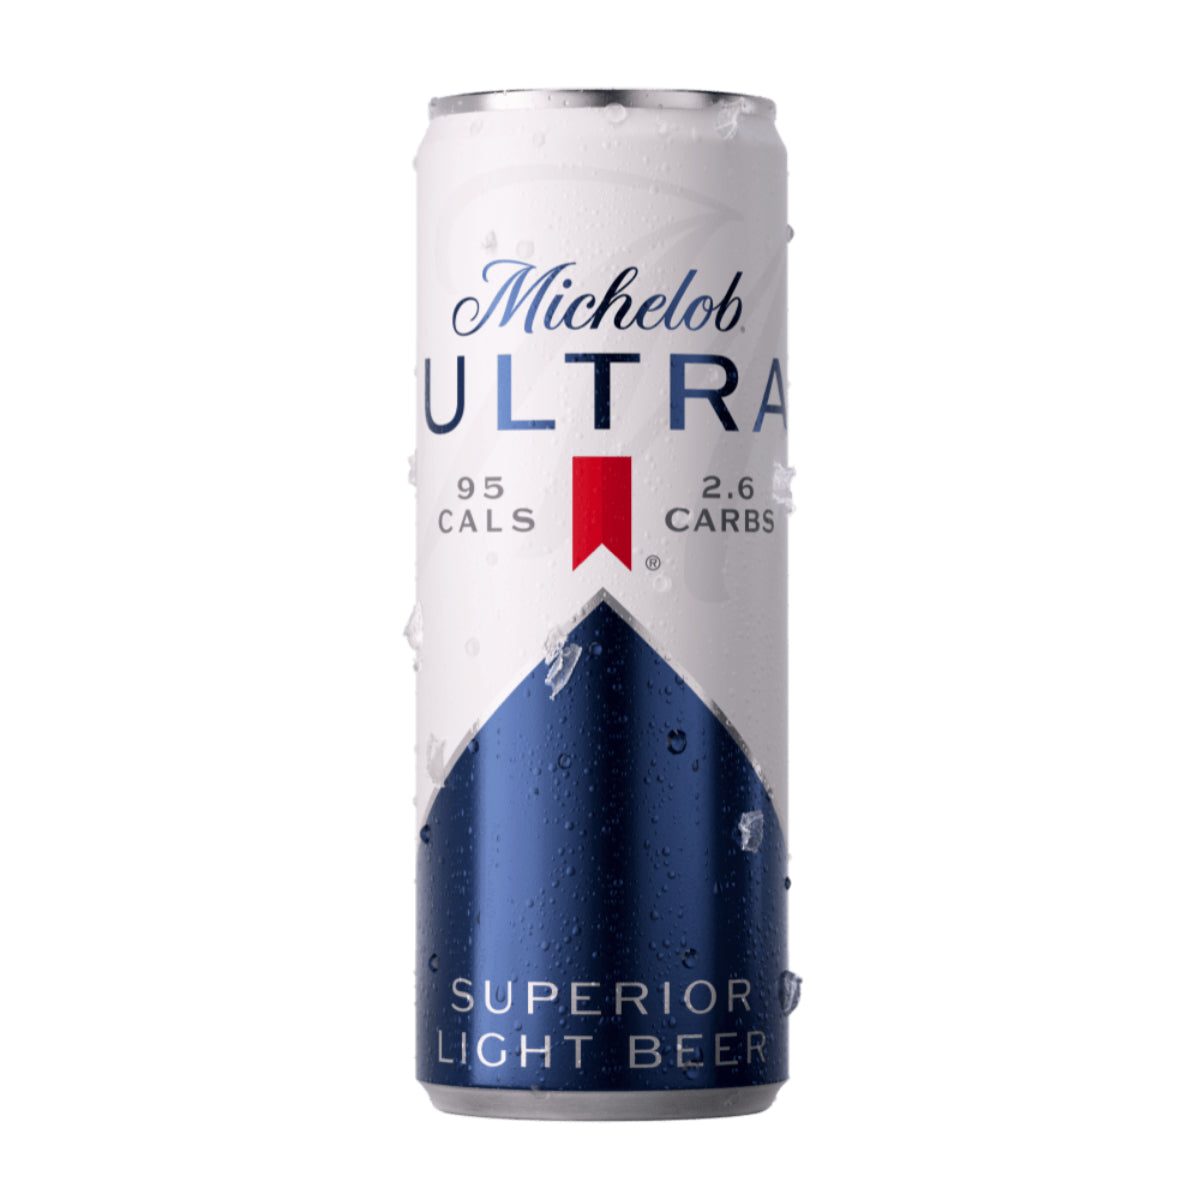 Michelob ULTRA is a superior light beer made for those with active